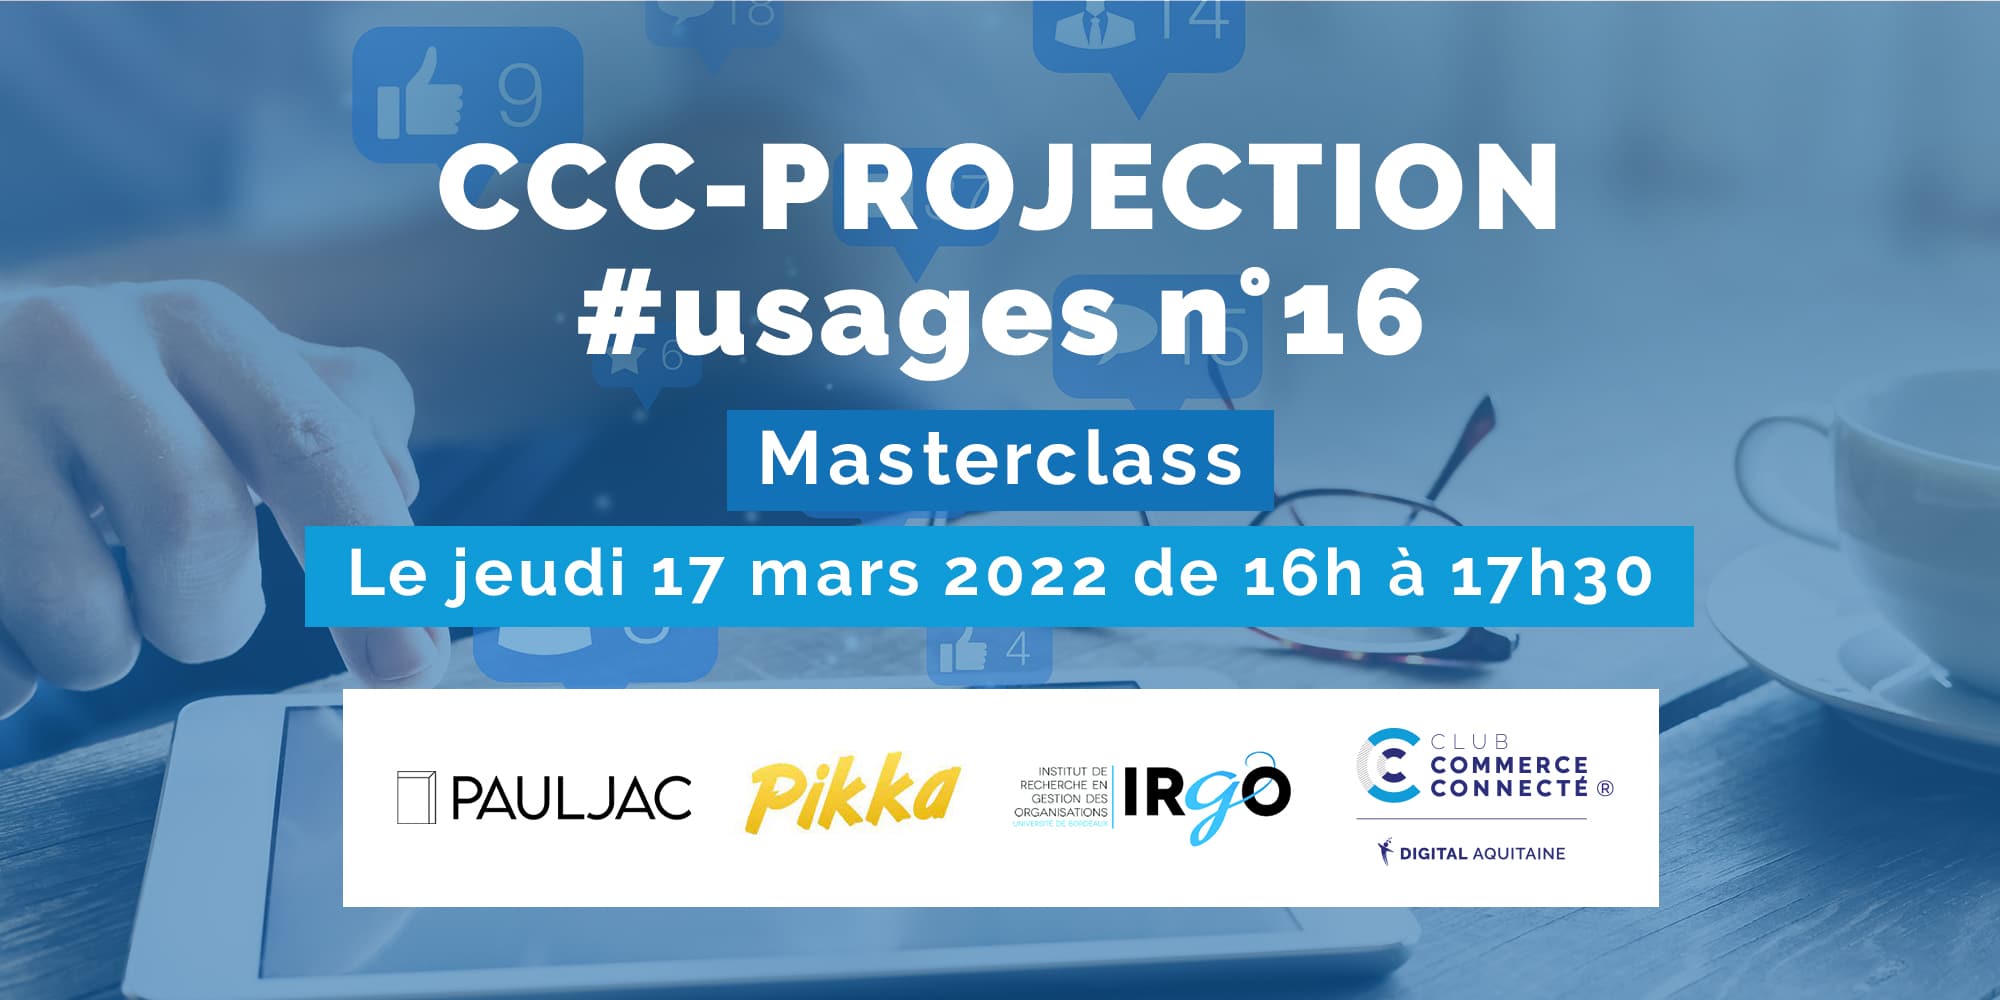 CCC-PROJECTION #usages n°16